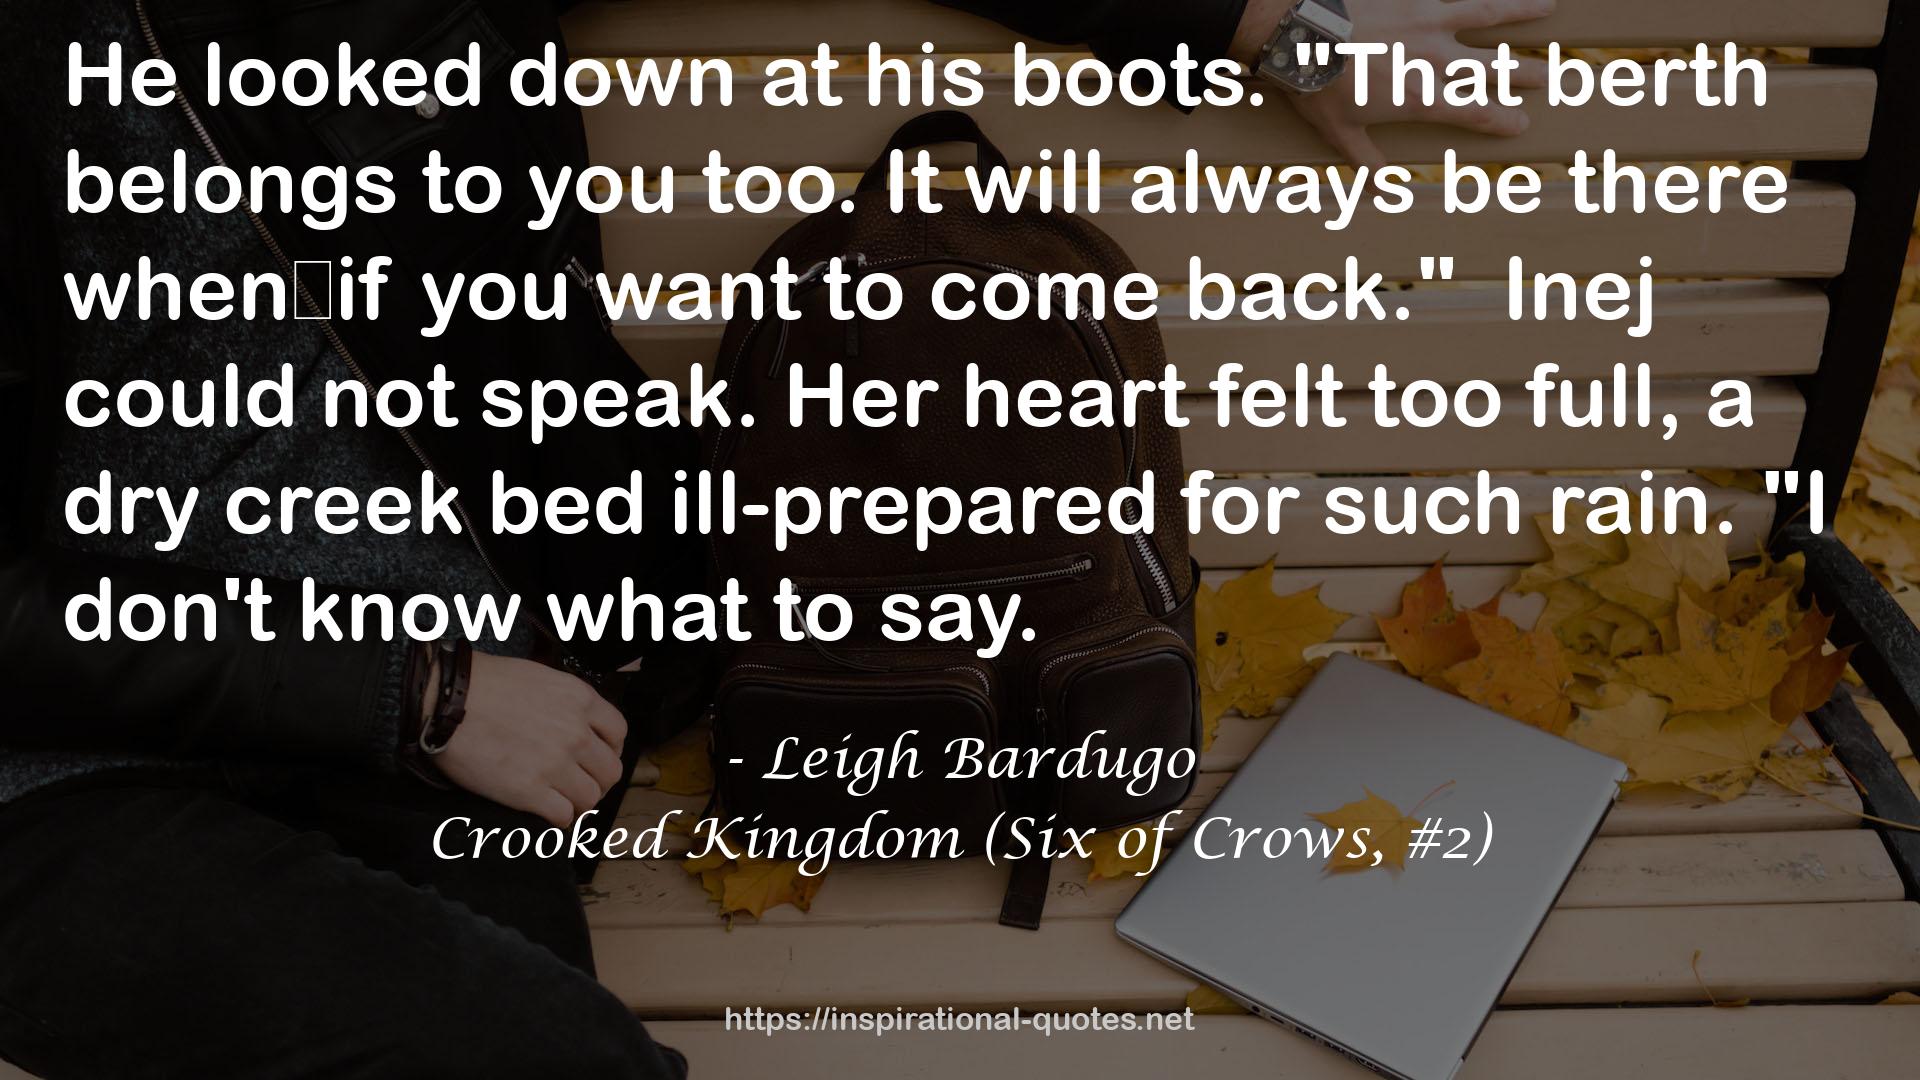 Crooked Kingdom (Six of Crows, #2) QUOTES